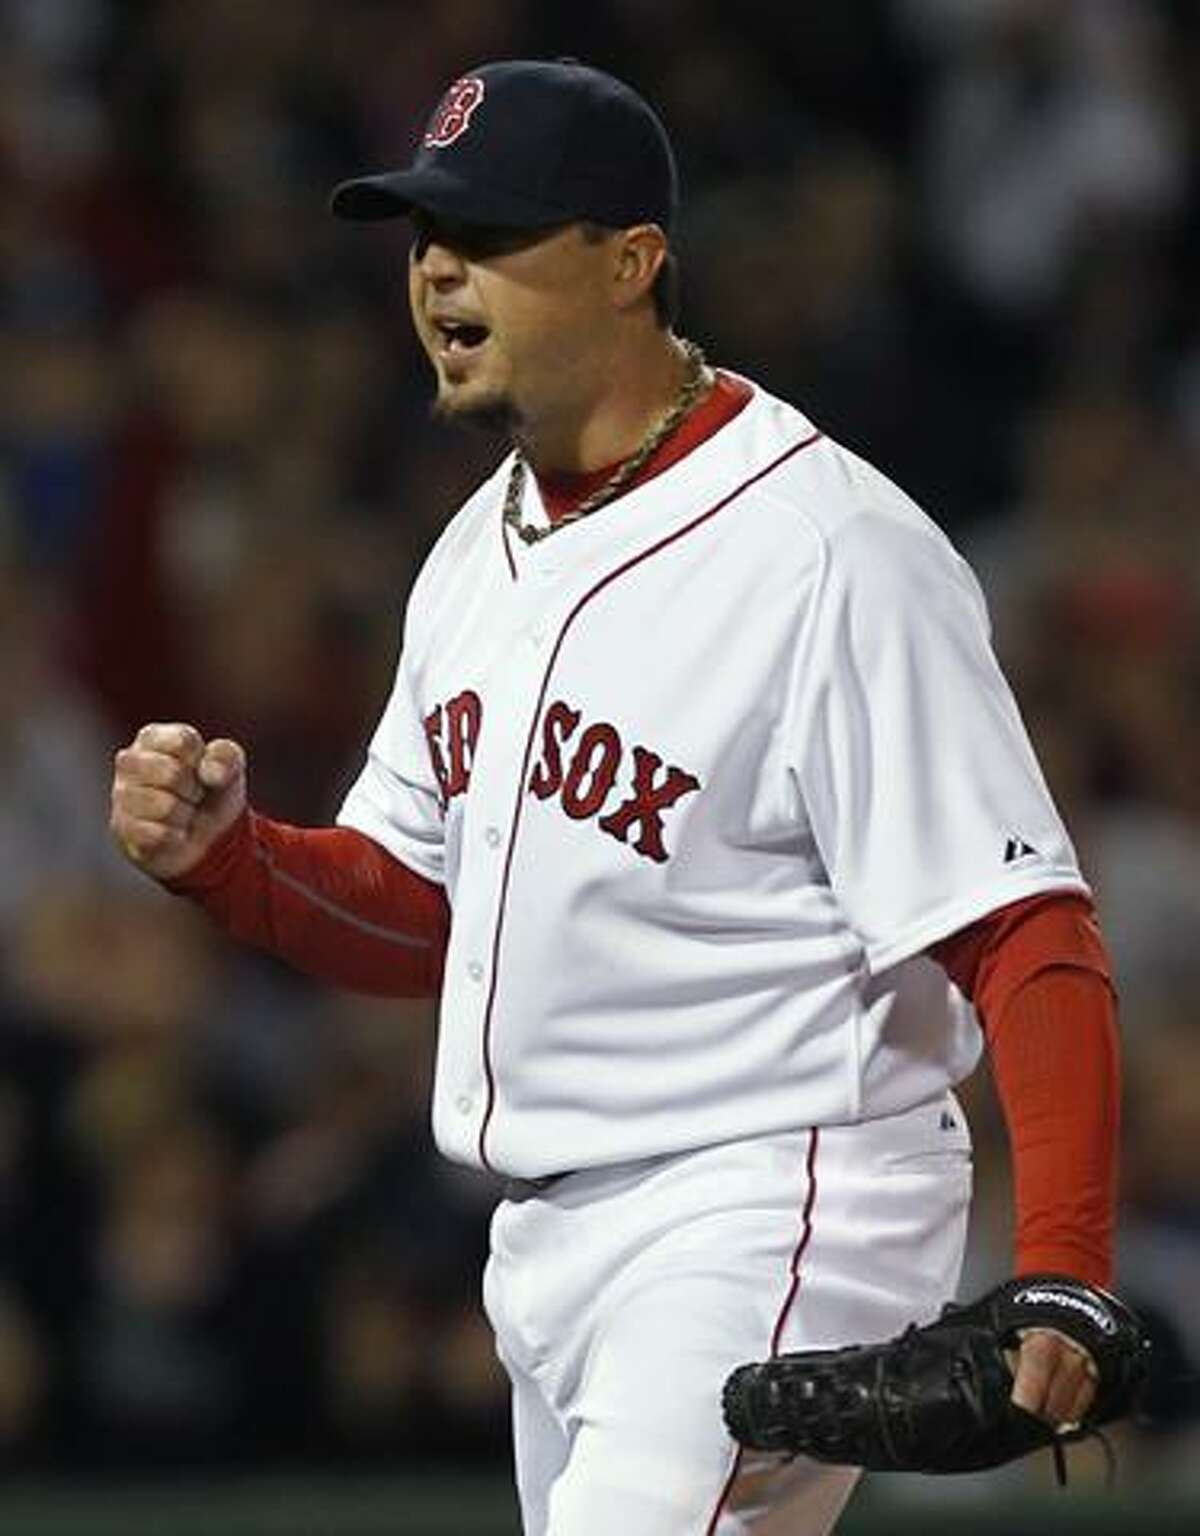 Boston Red Sox starting pitcher Josh Beckett pumps his fist after the Red Sox turned a double play against the New York Yankees during the third inning of a baseball game at Fenway Park in Boston on Sunday, April 10, 2011. (AP Photo/Winslow Townson)